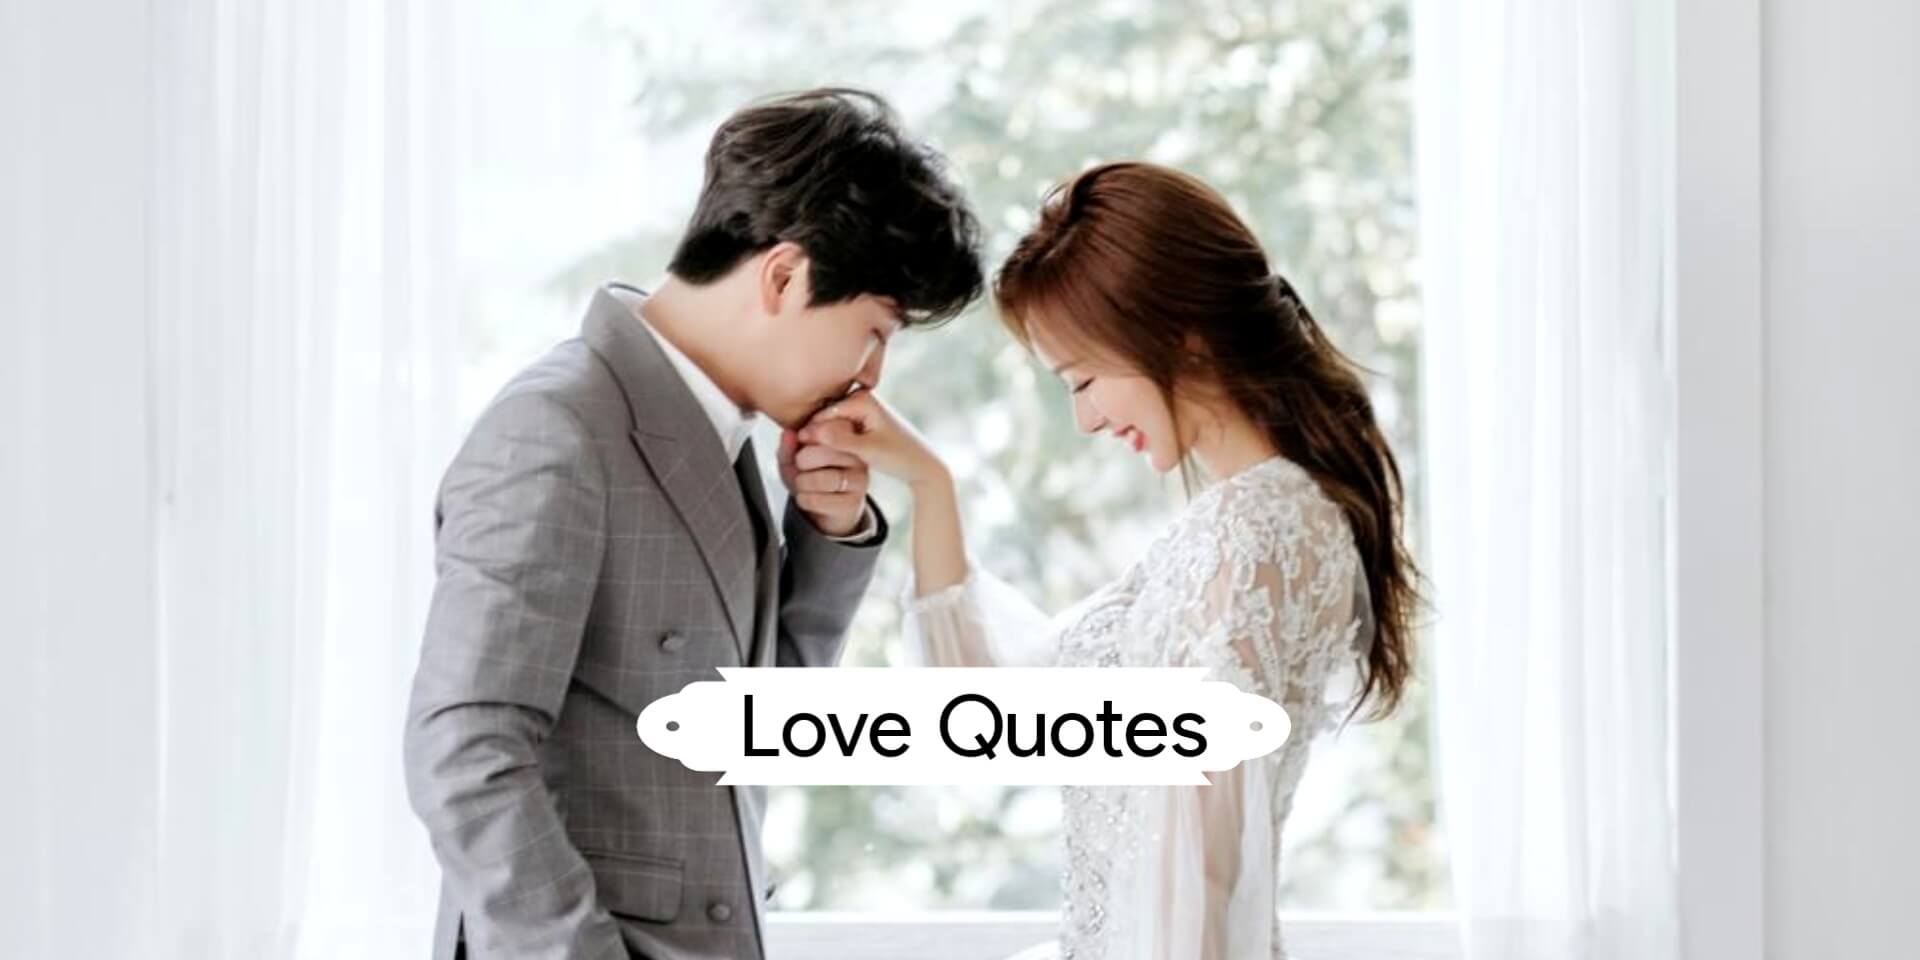 Hindi 2022 in my dating for friend best quotes shayari best 